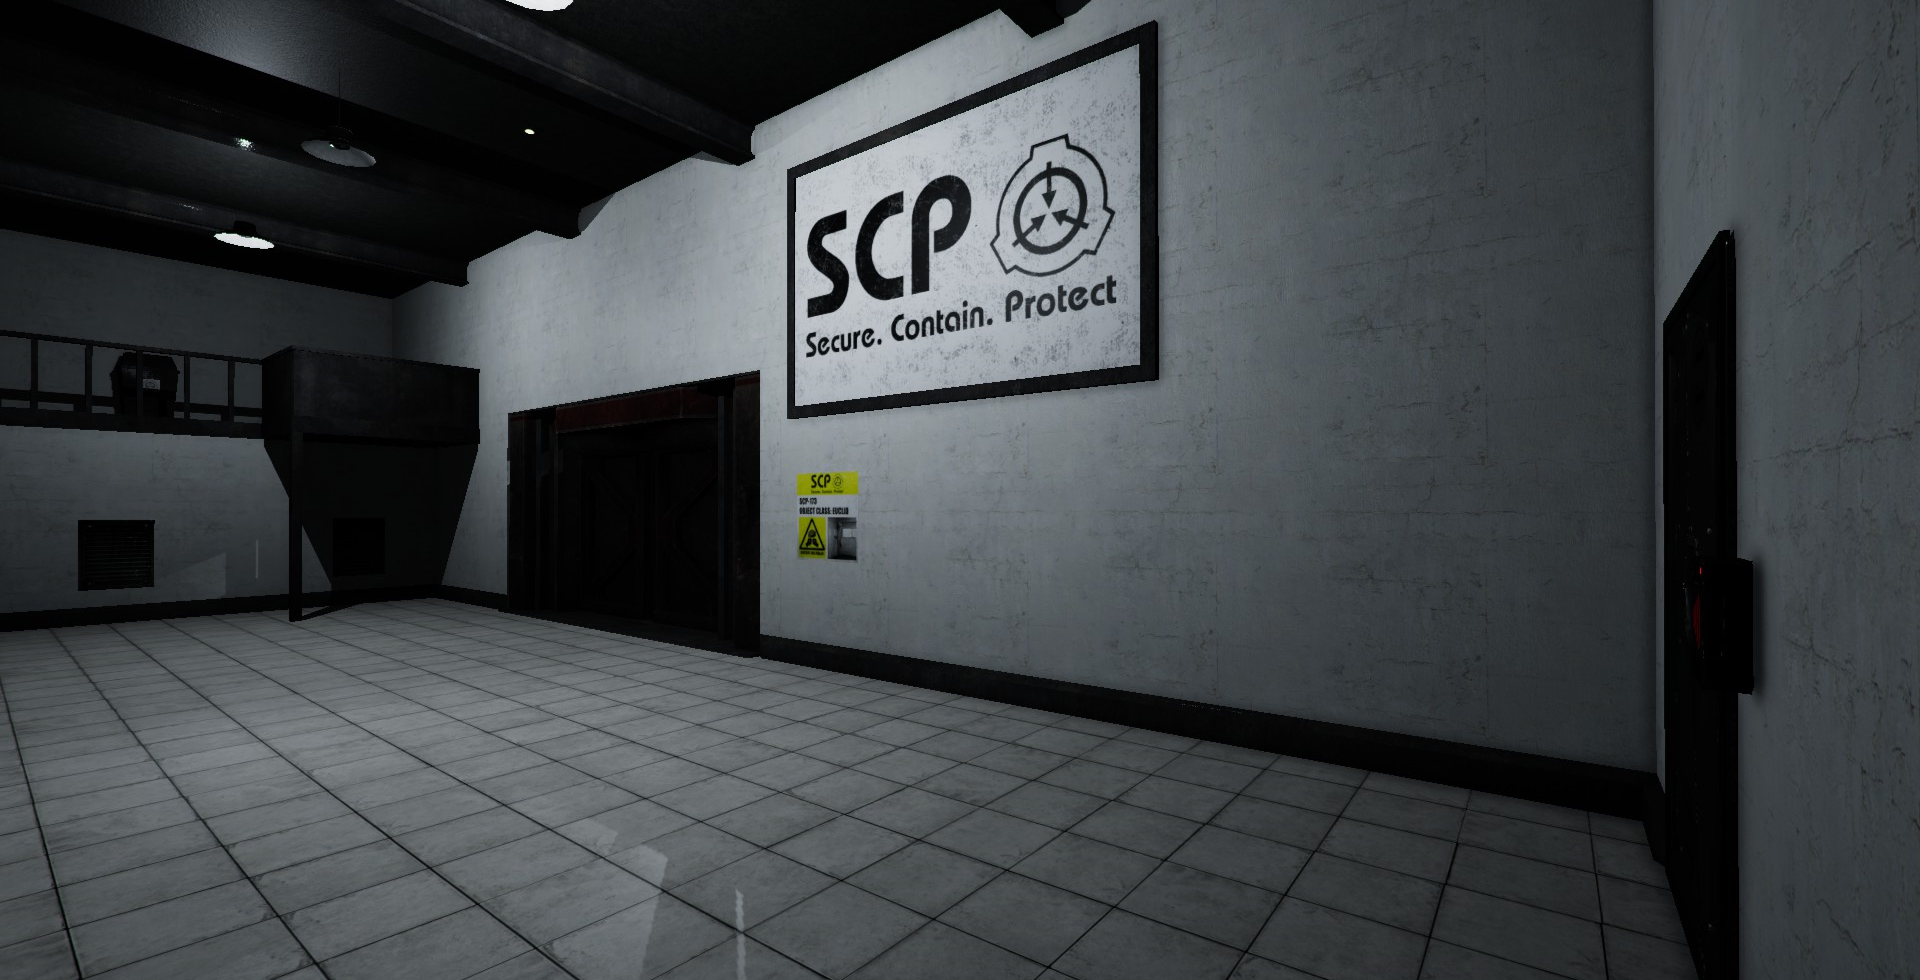 Scp-3127